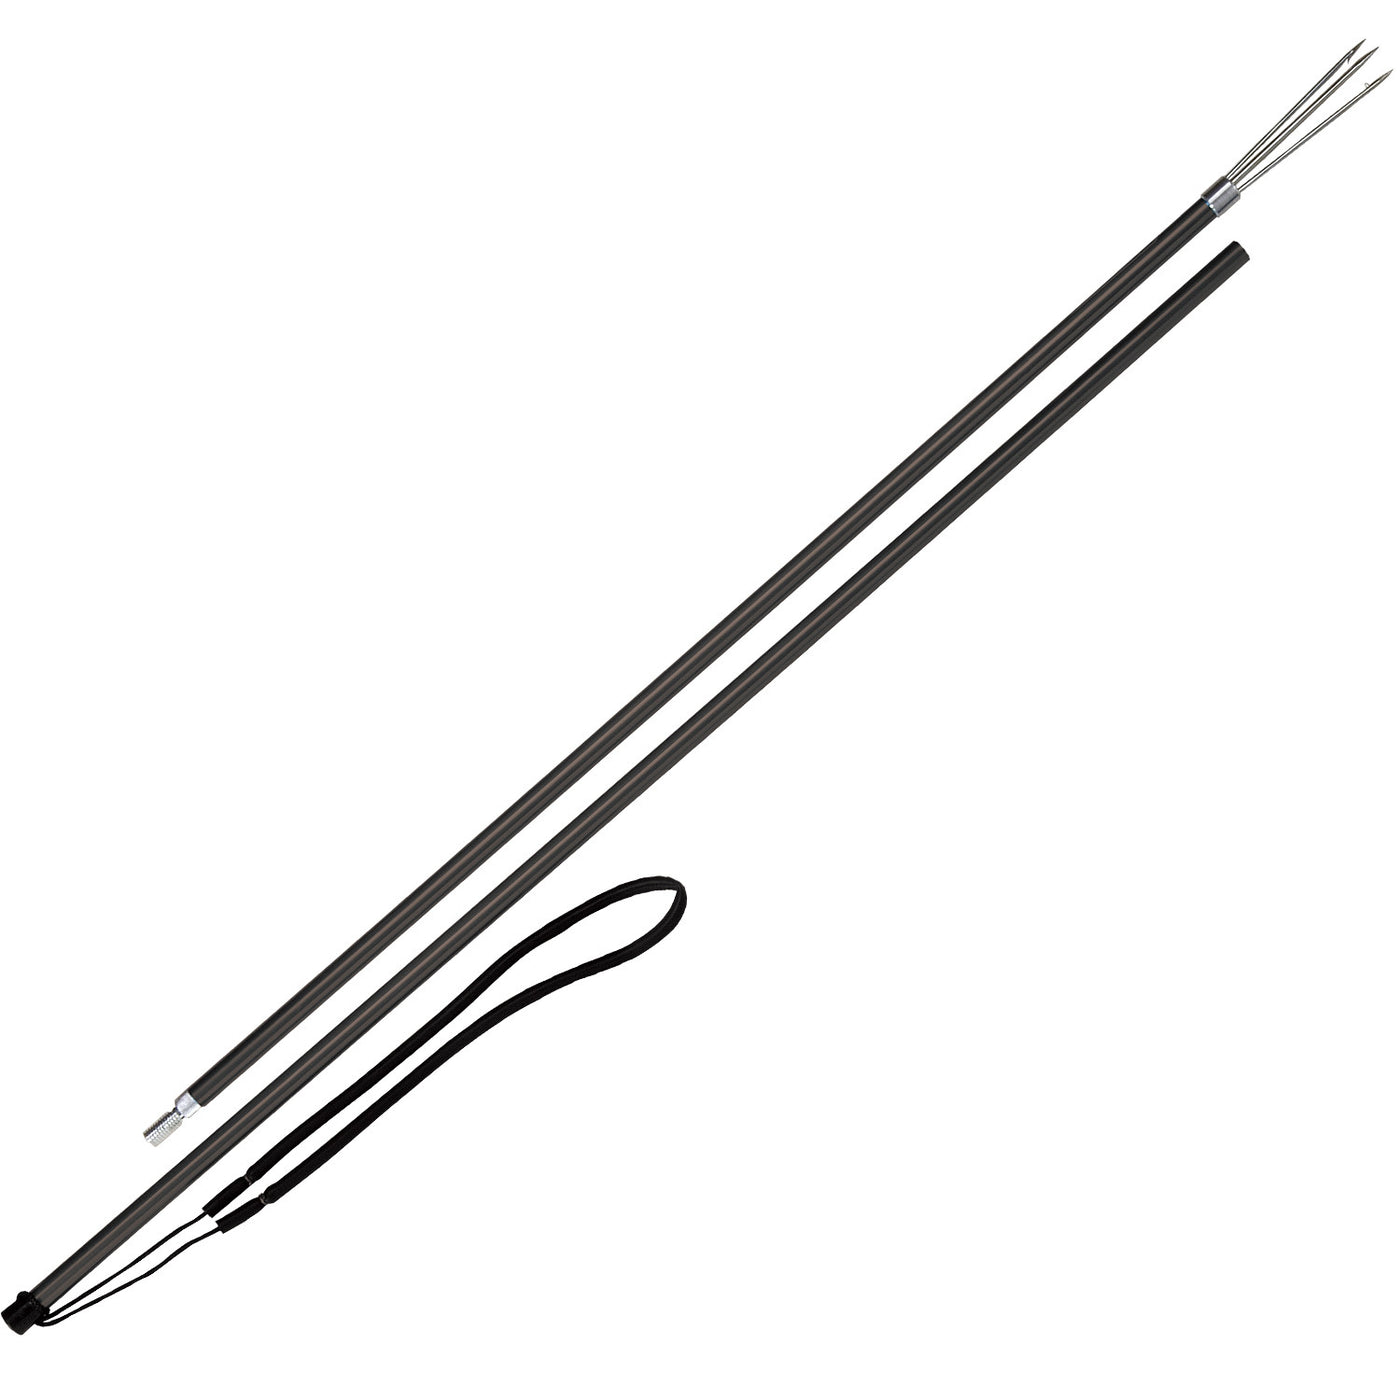 IST Aluminum 2 Segment Pole Spear with 3-Prong Paralyzer Tip